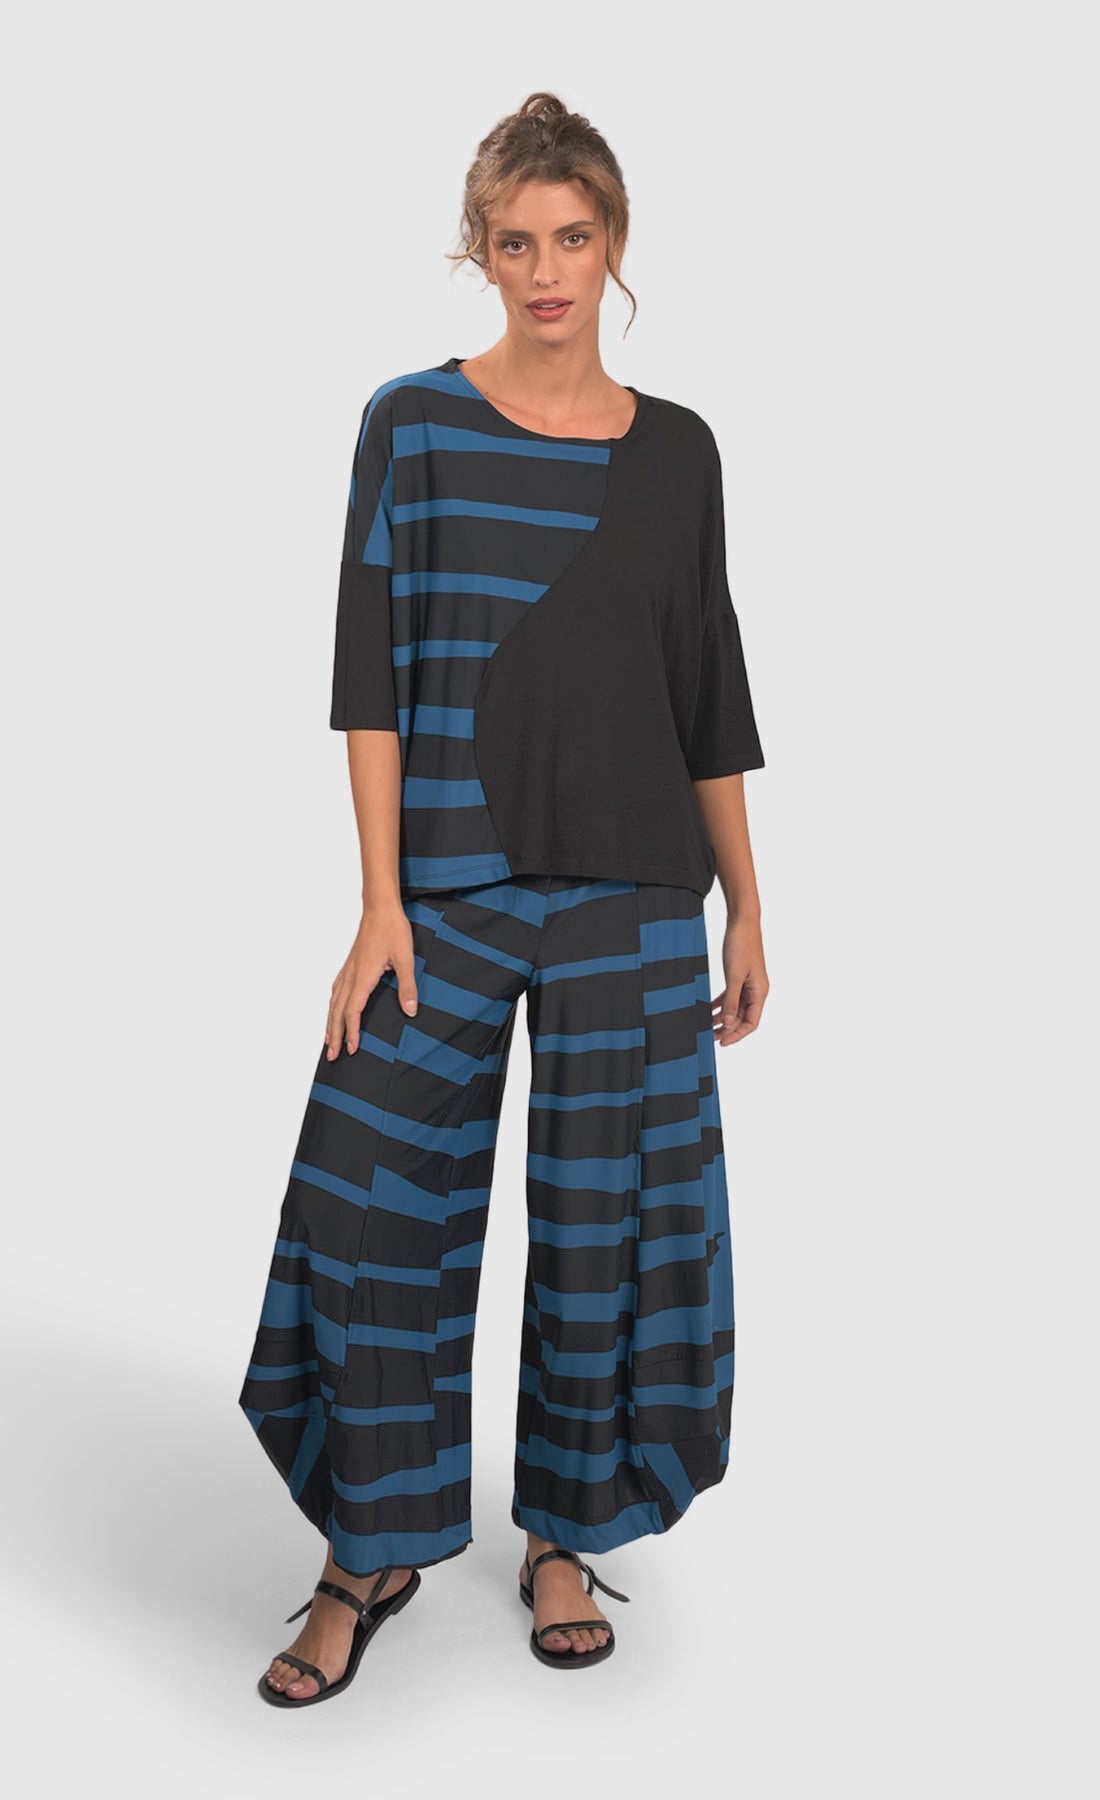 Front full body view of a woman wearing blue and black striped pants and the alembika tekbika ocean wave top. This top is black with a right sides wave paneling design in blue. The top as a scoop neck and drop shoulder, 3/4 length sleeves.